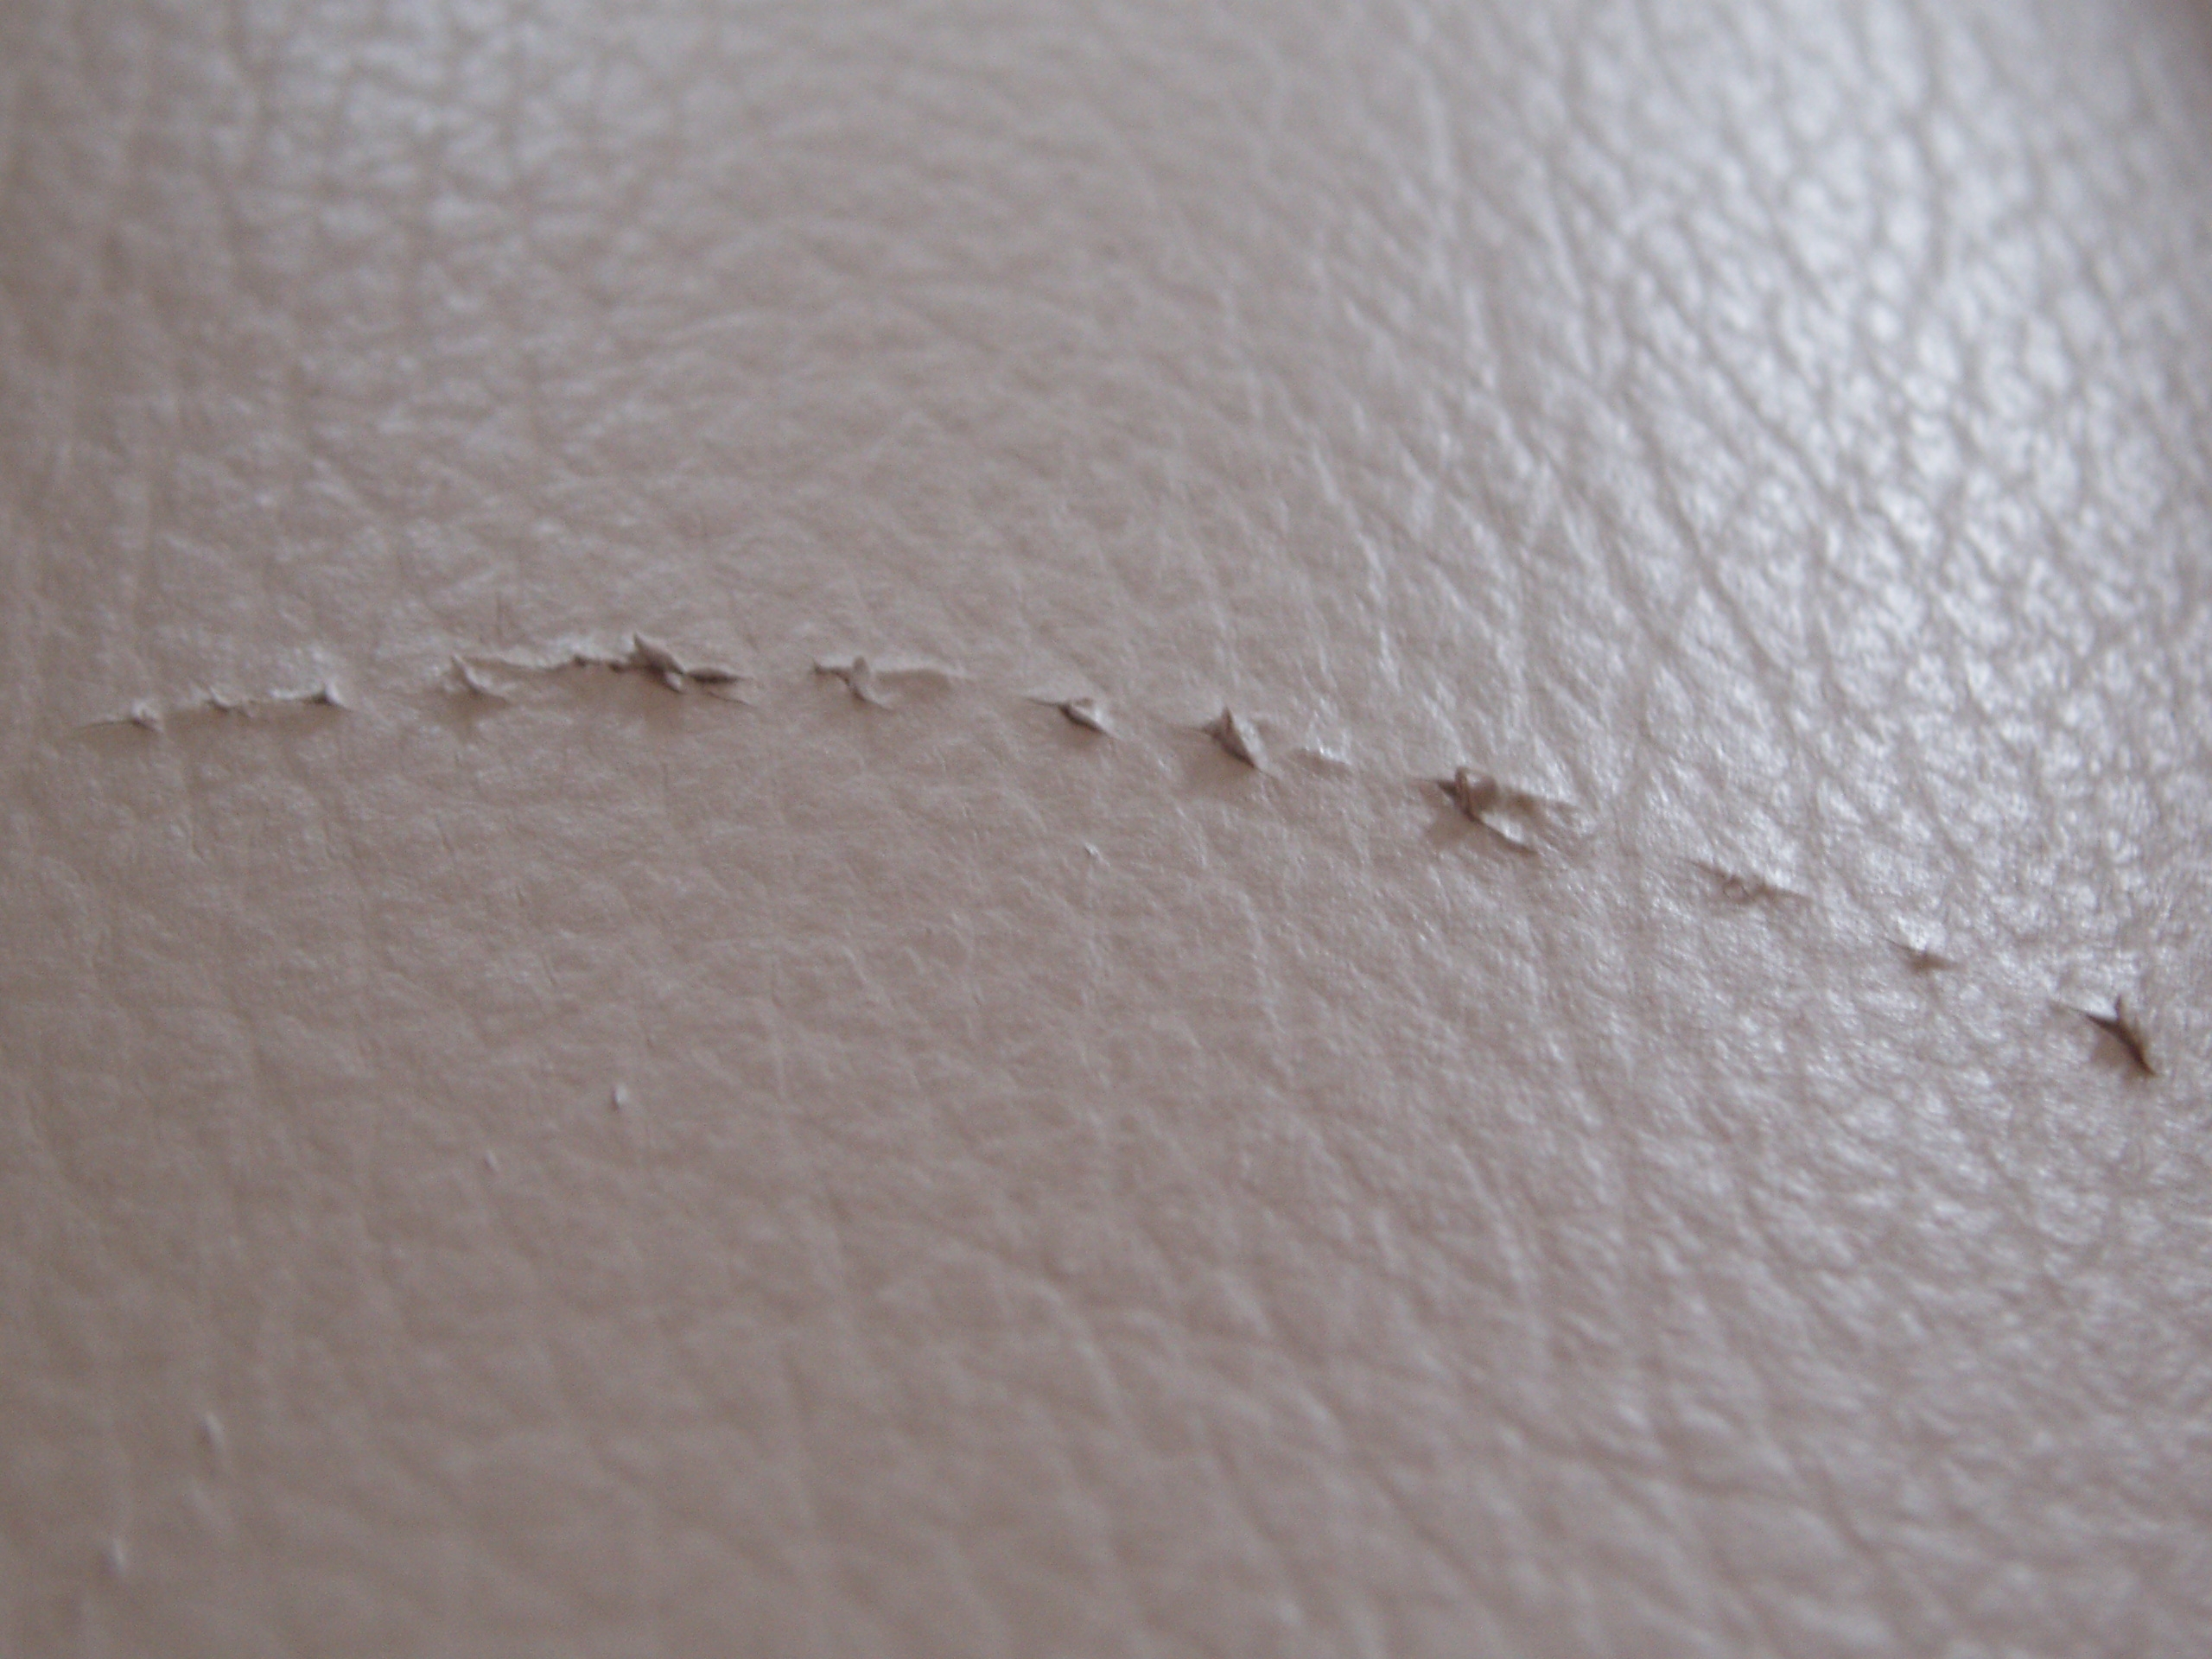 How To Repair Cat Scratches On Leather, How To Repair Cat Scratches Leather Sofa